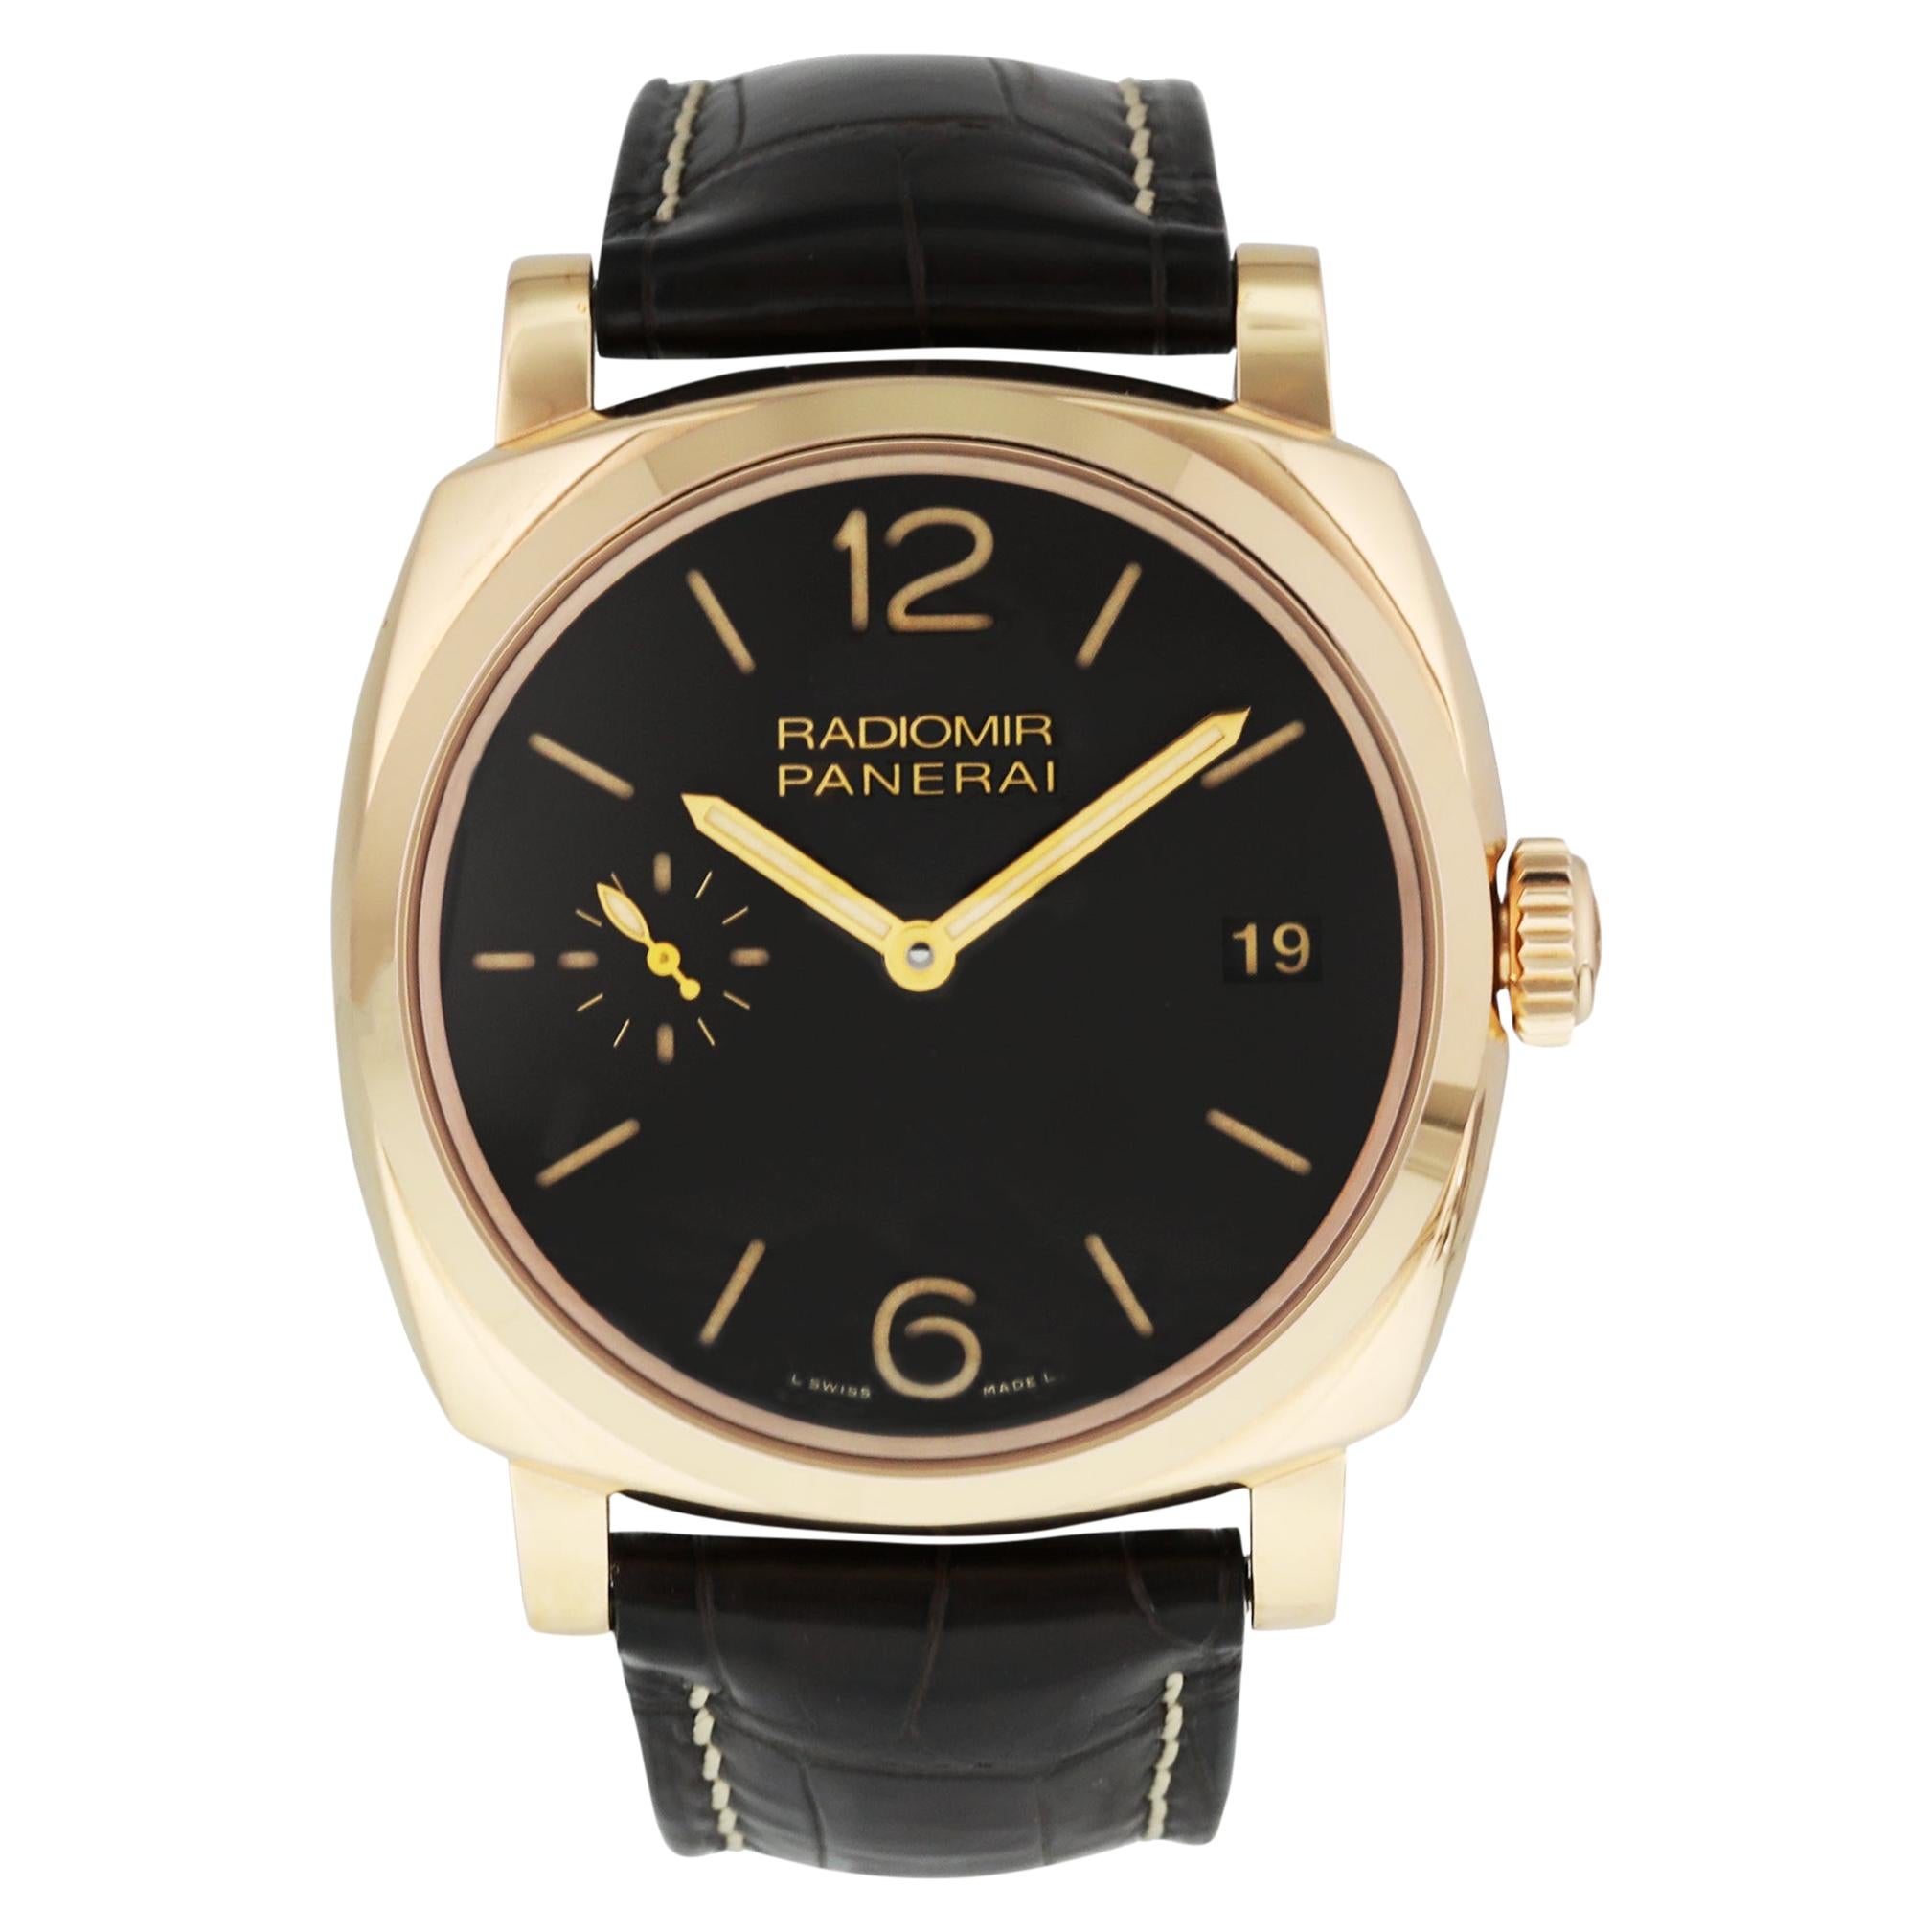 Panerai Radiomir 1940 PAM515 3 Days Oro Rosso Men's Watch Box and Papers For Sale